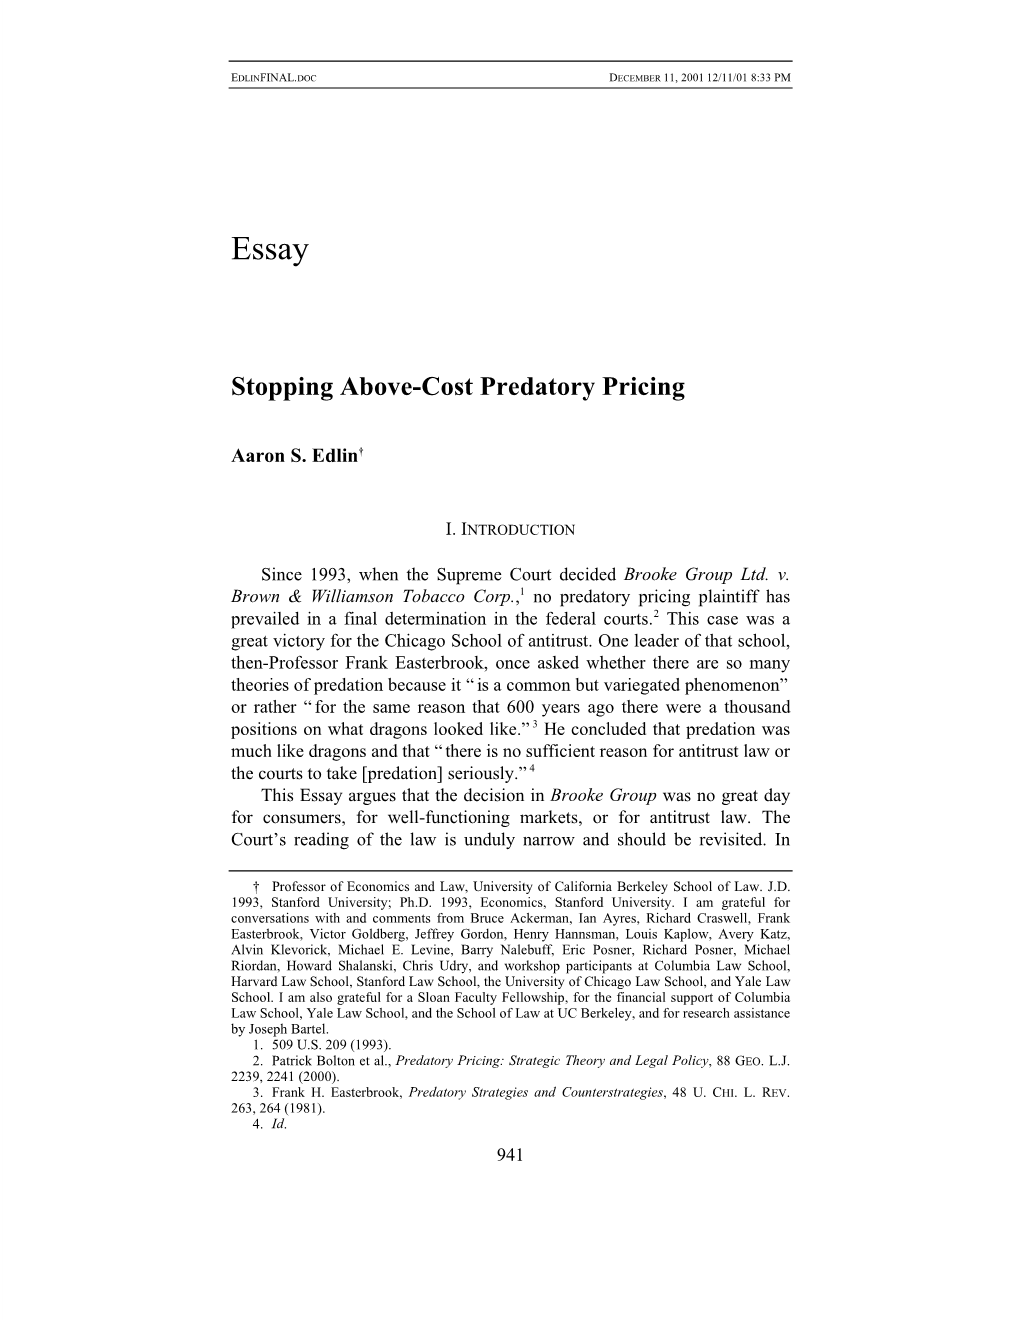 Stopping Above-Cost Predatory Pricing